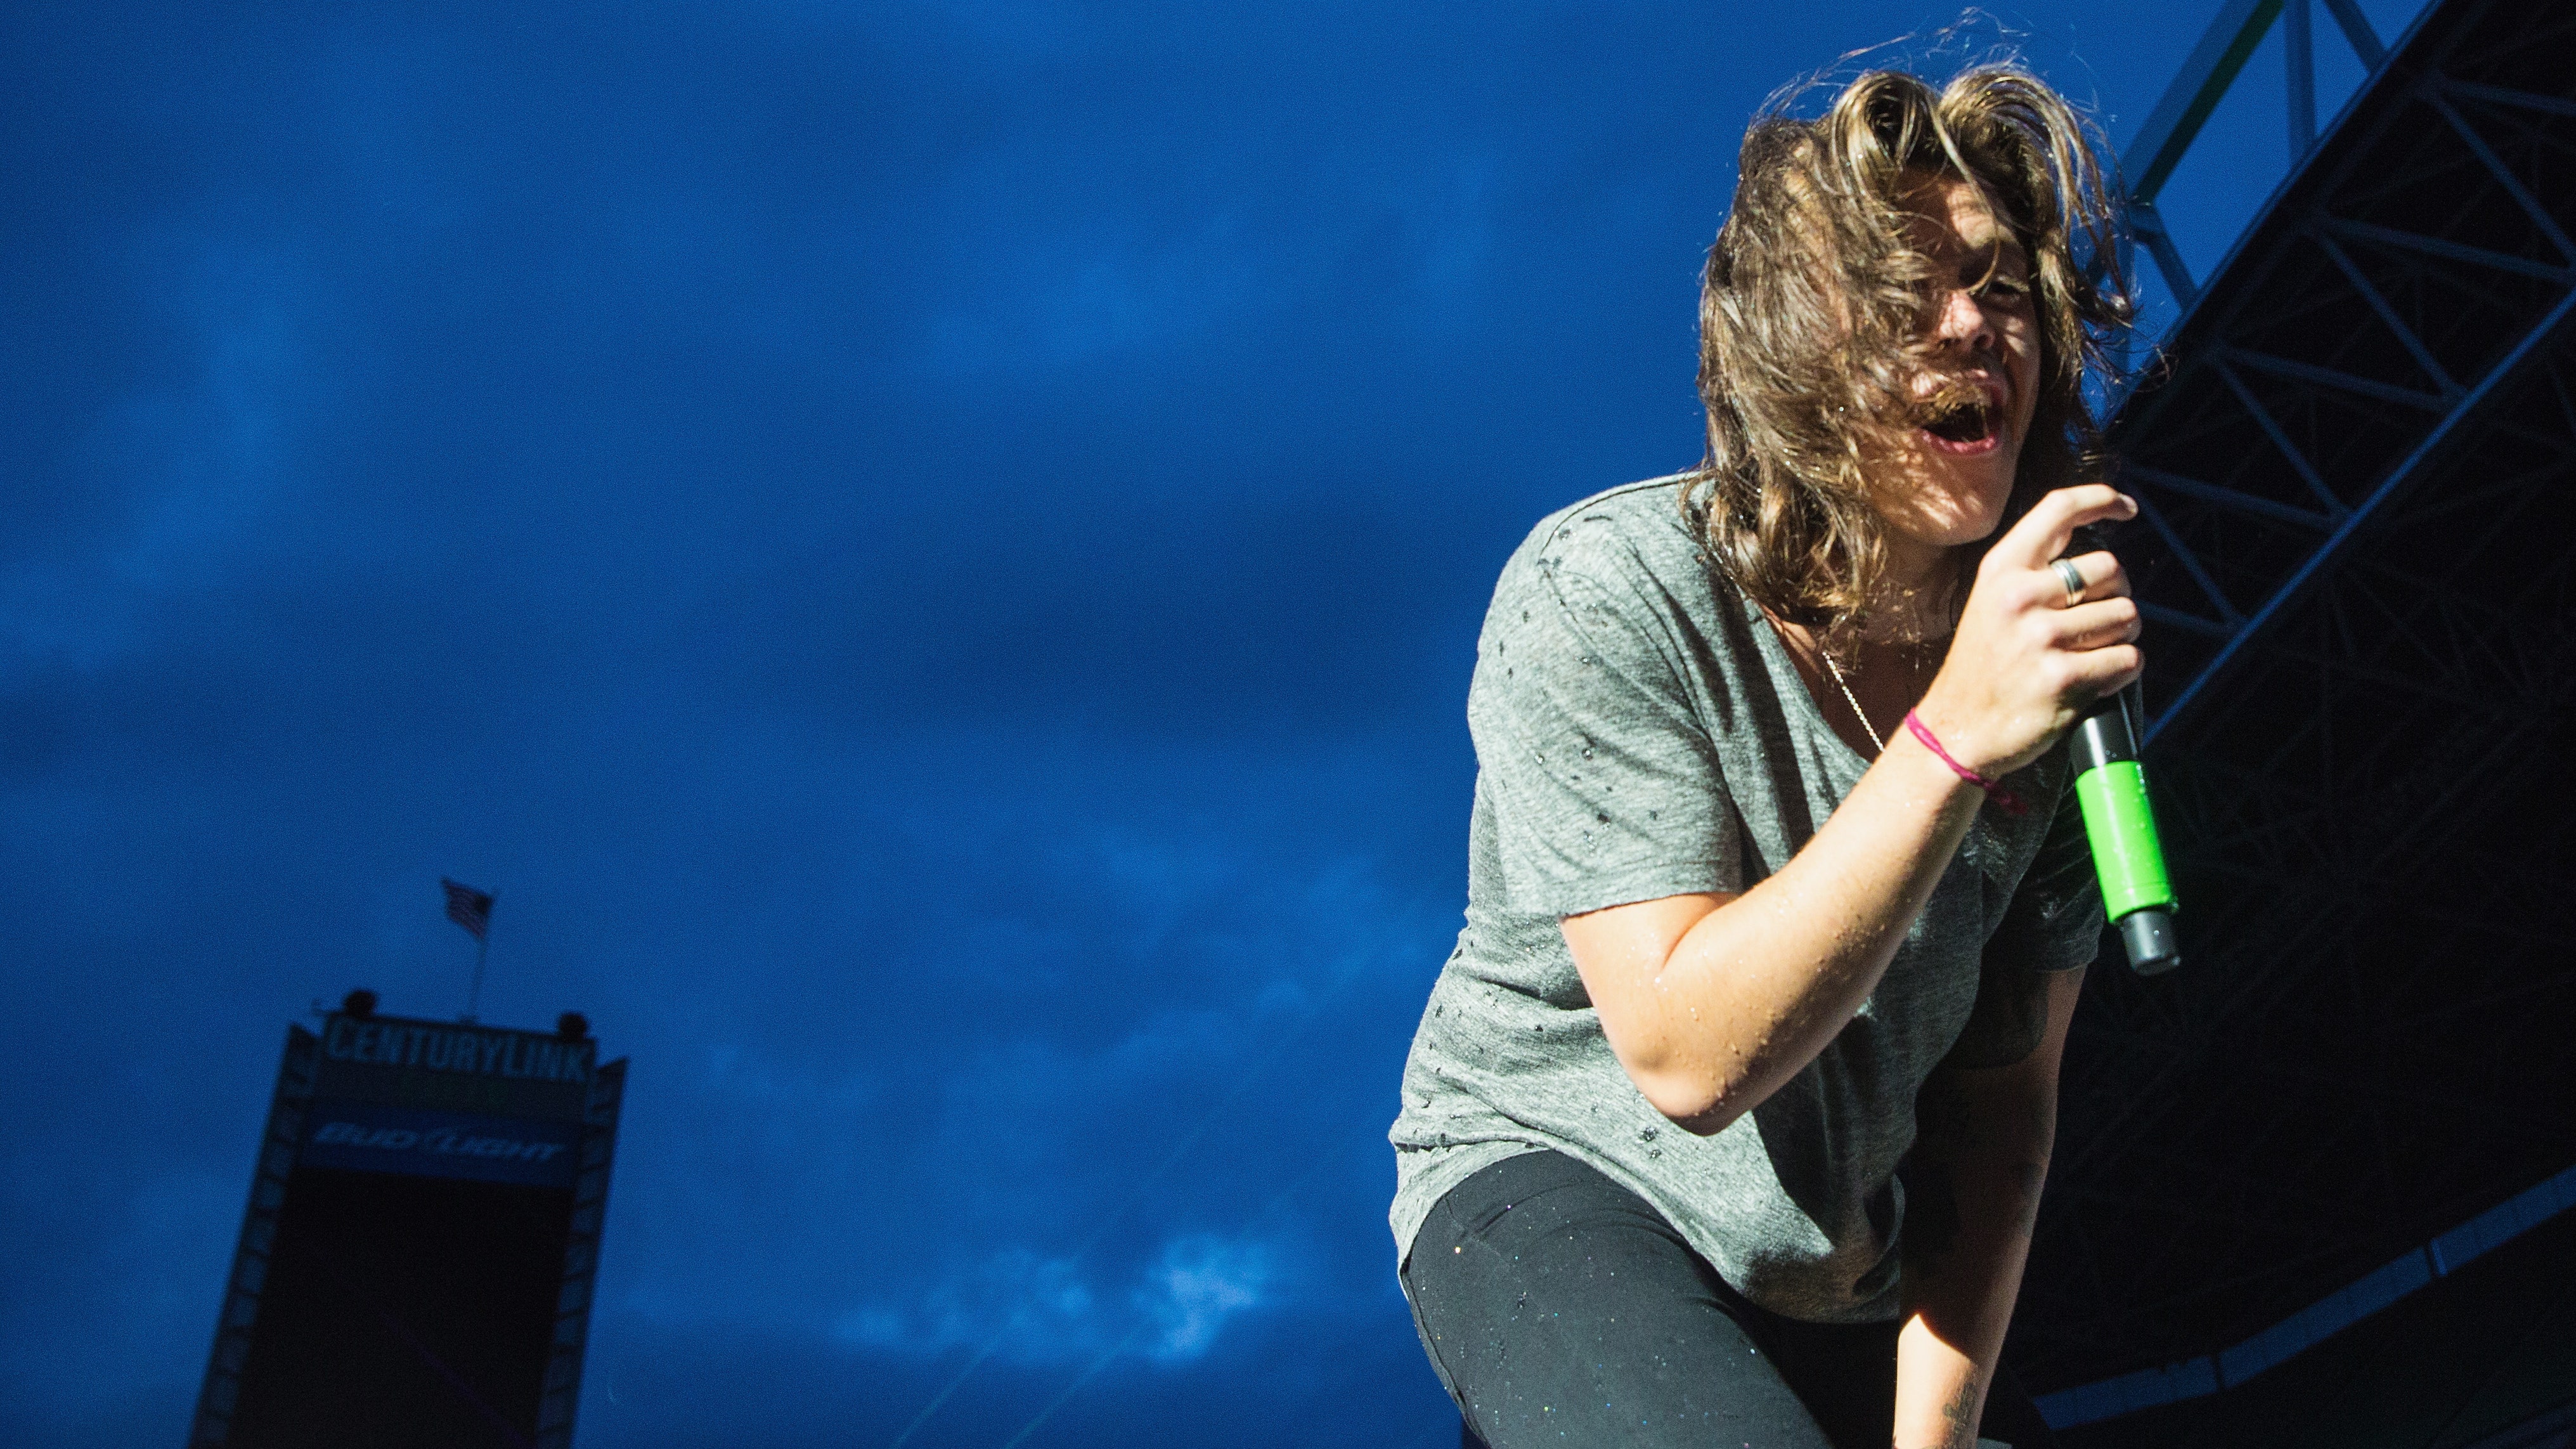 Harry Styles' Long Hair Could Use a Change